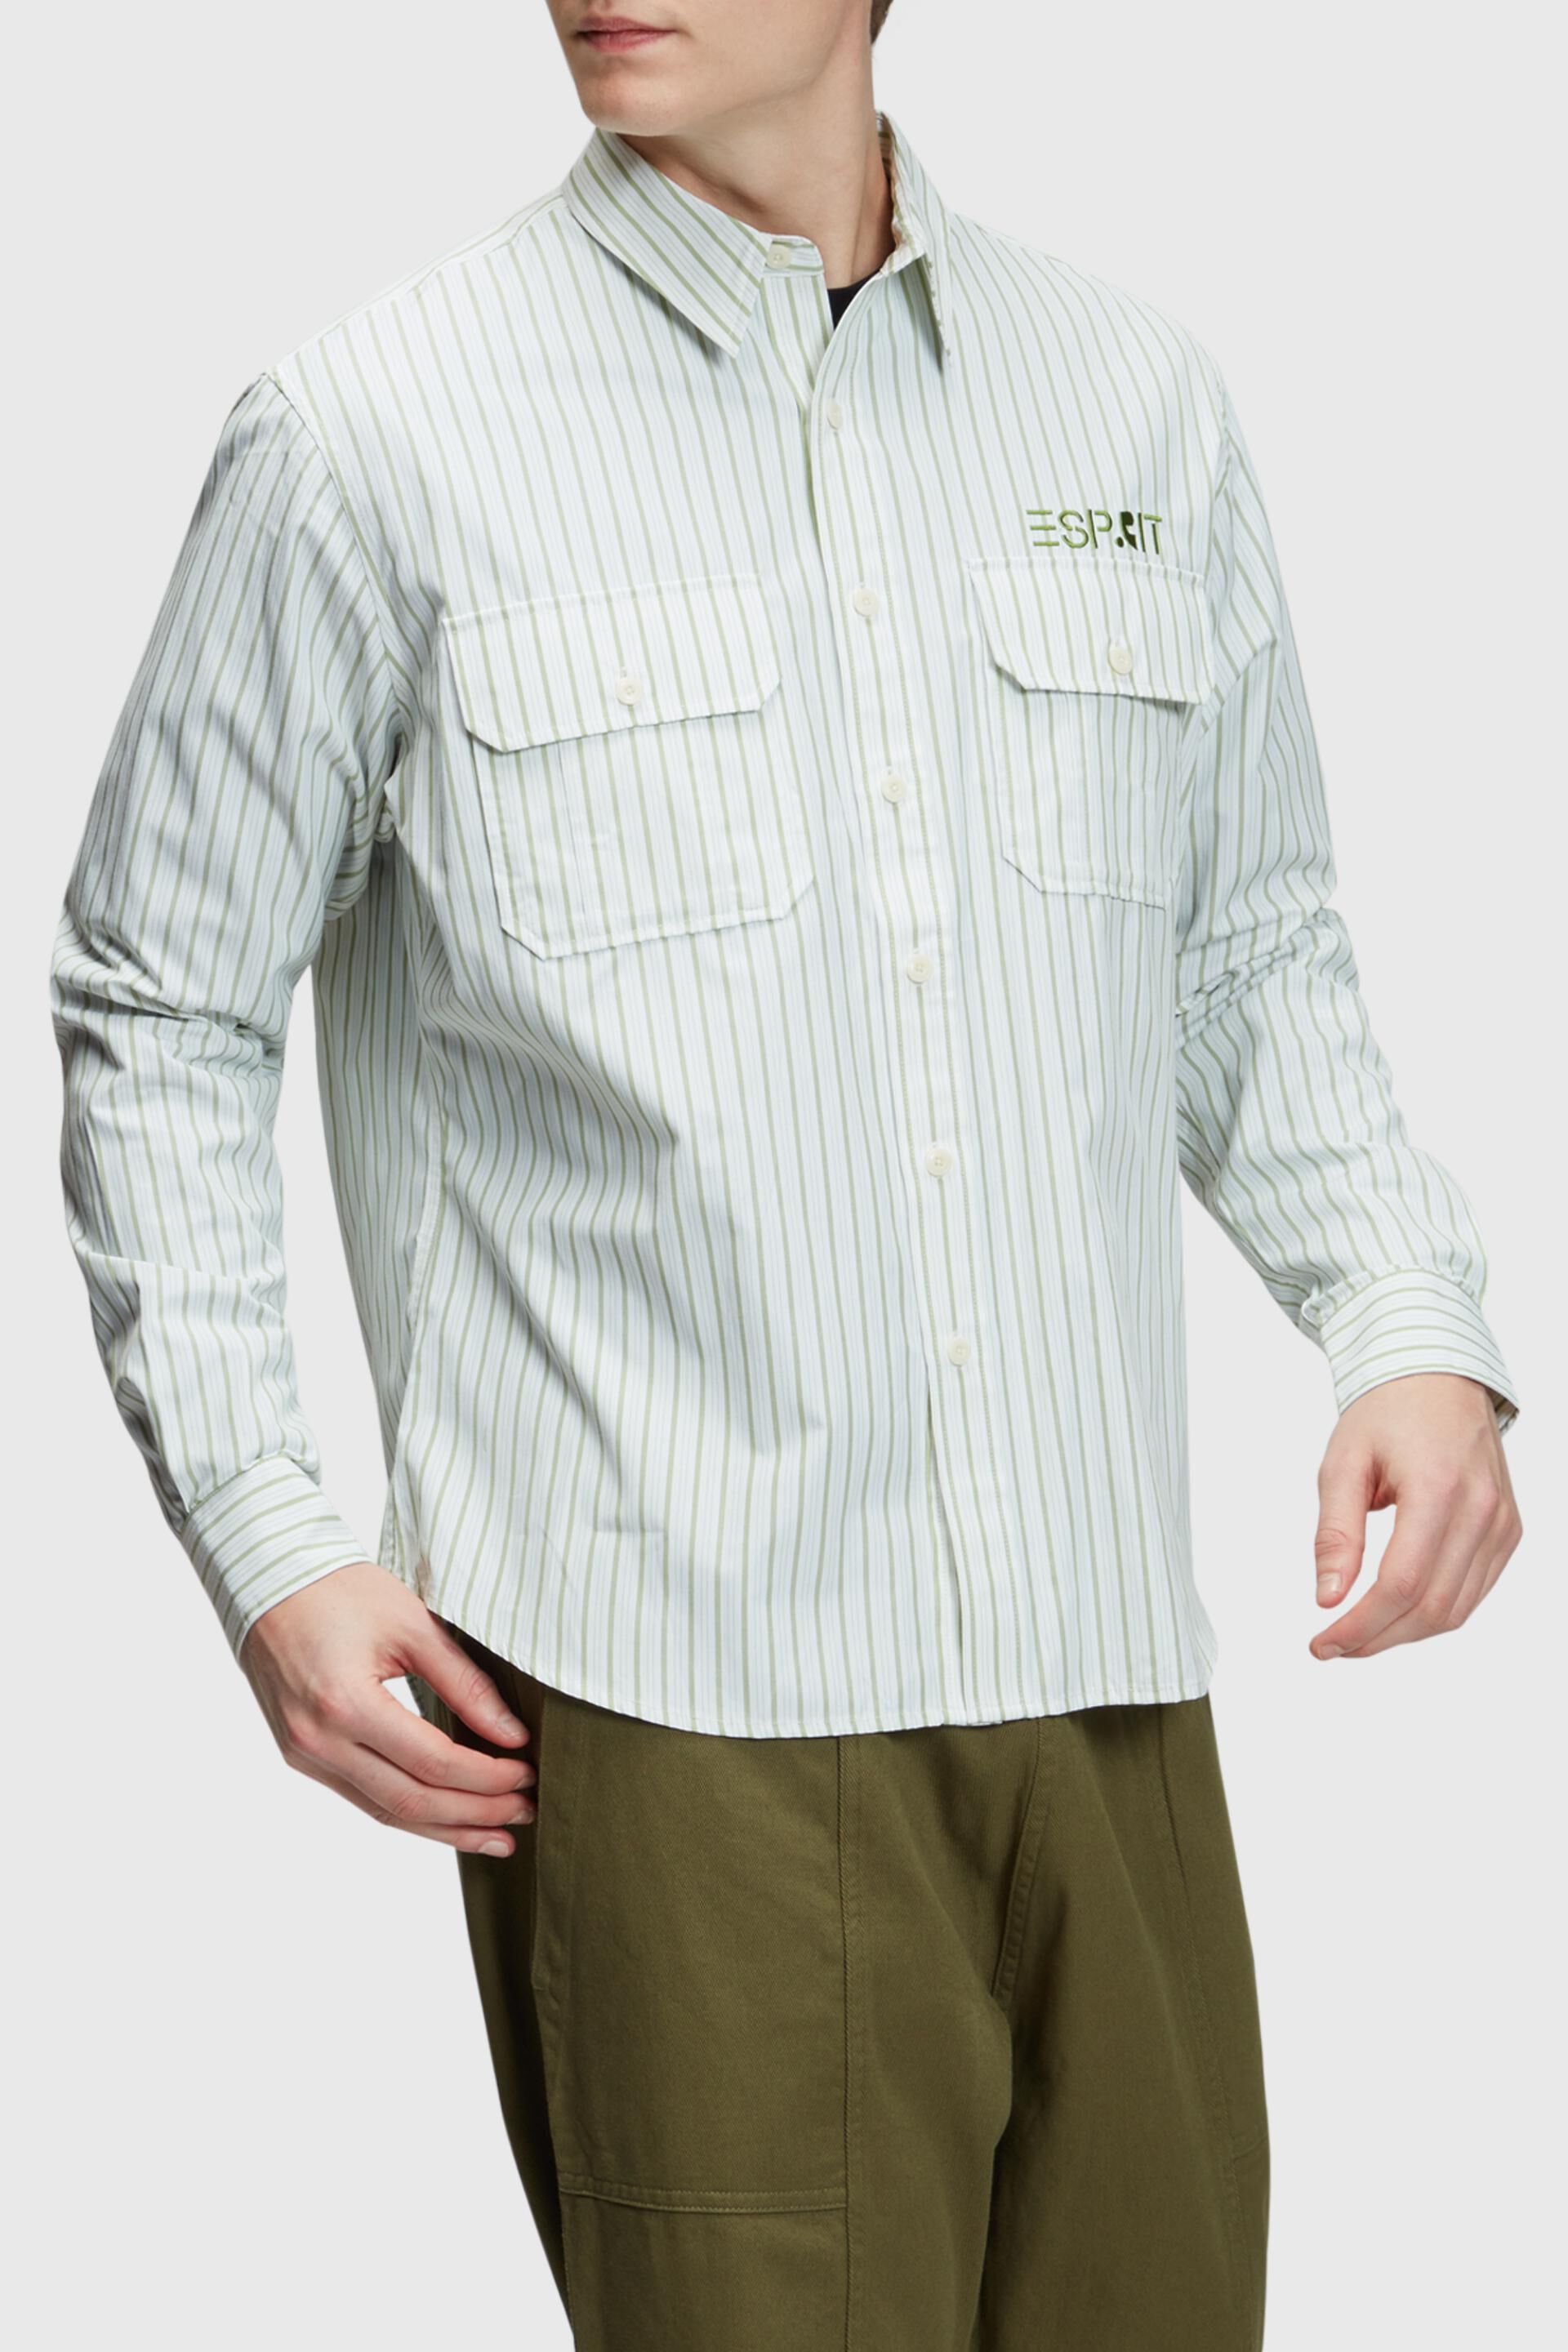 Esprit Relaxed shirt fit striped